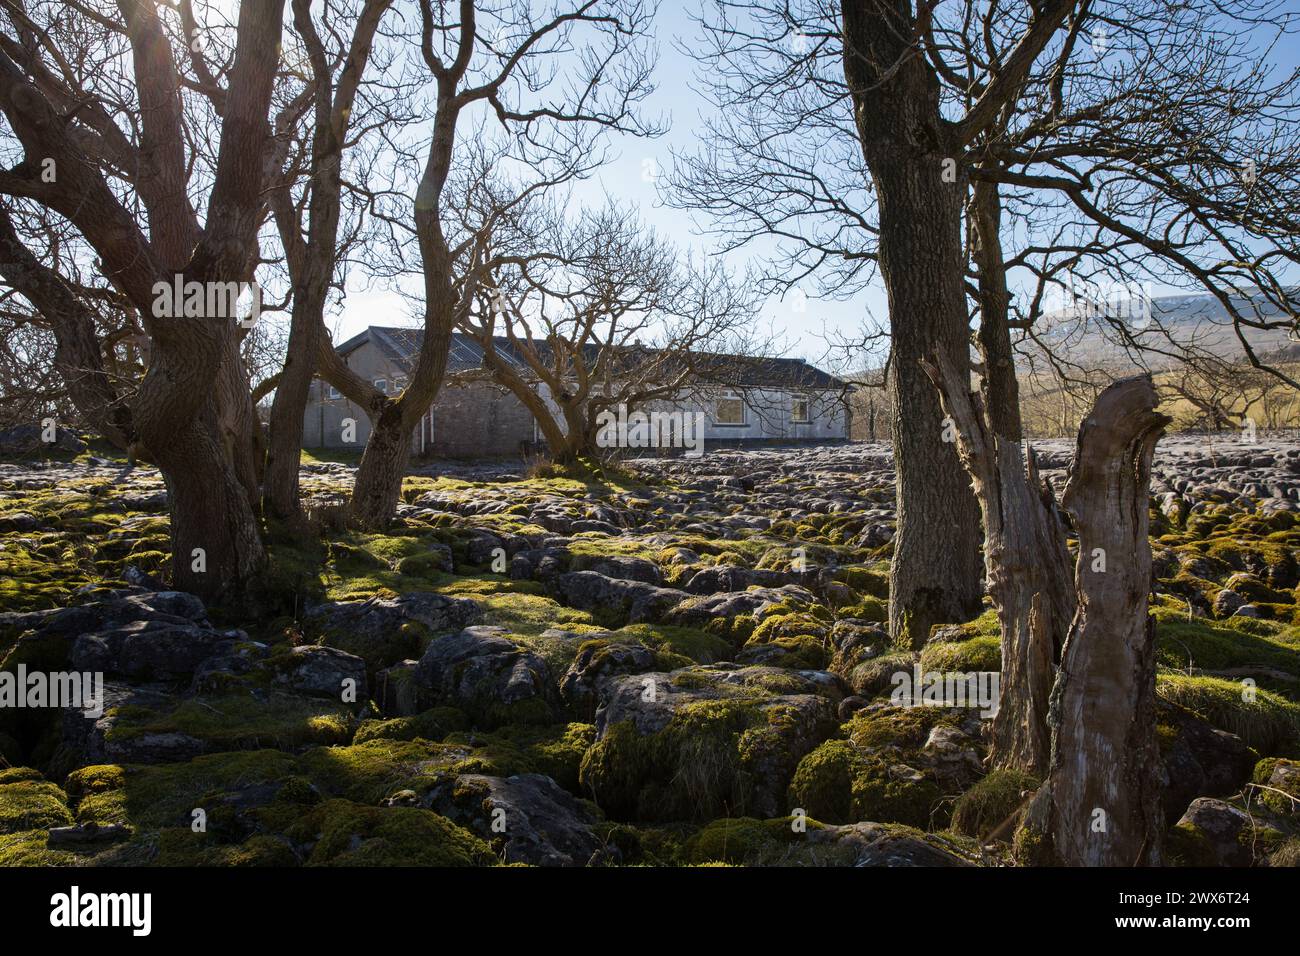 Trees in front of a remote building / outdoor centre sat on a mossy limestone pavement in the North Yorkshire countryside, UK on a sunny day Stock Photo